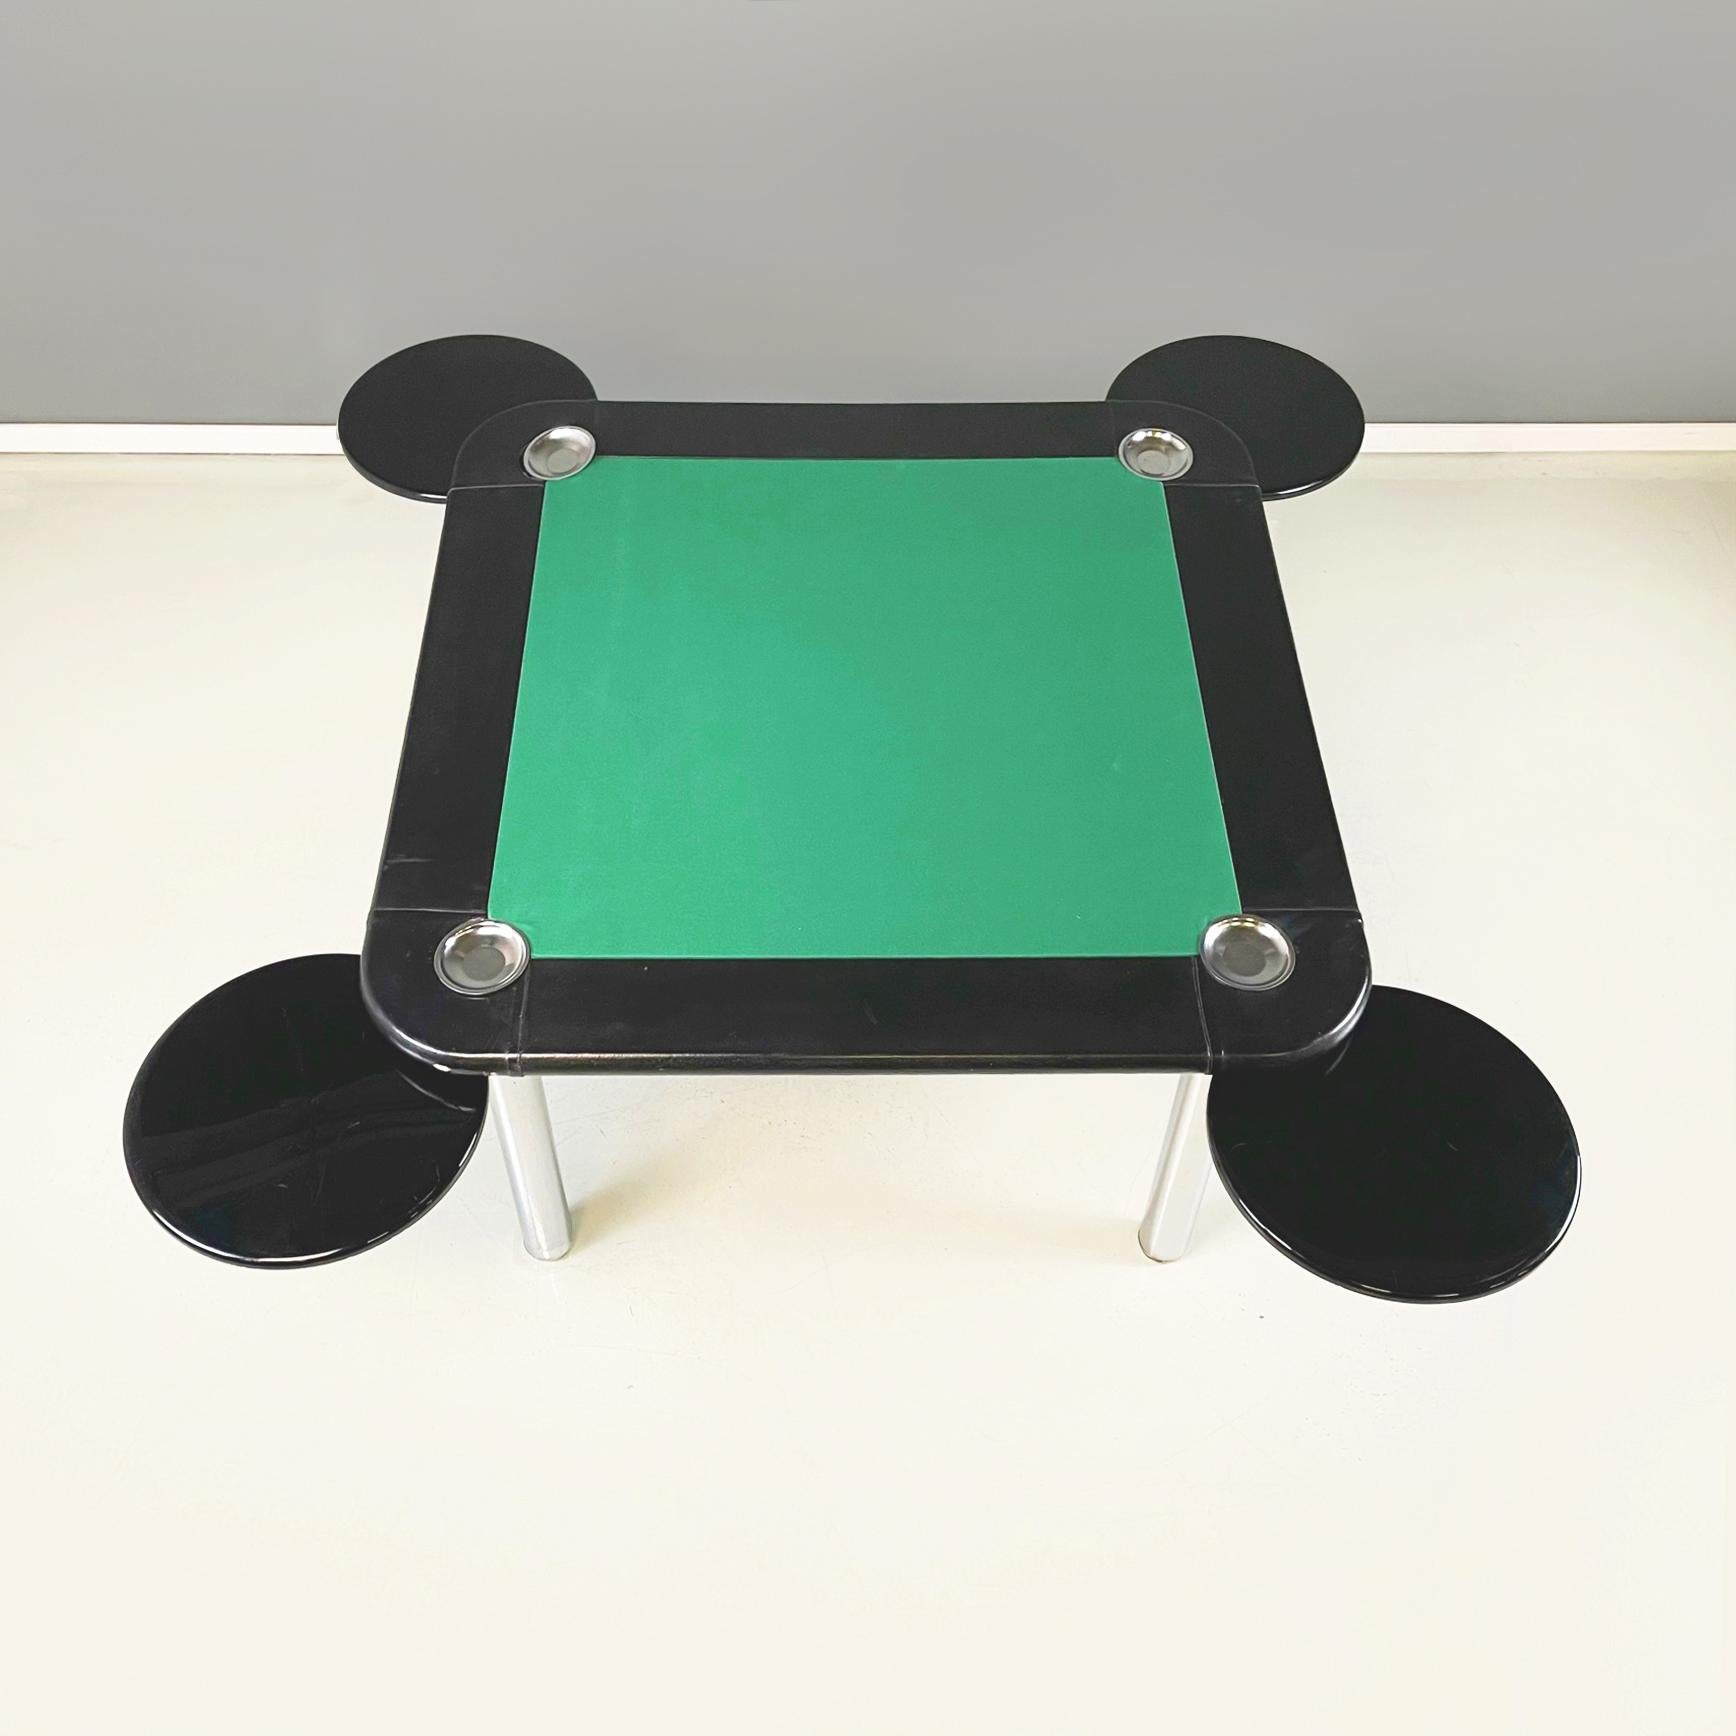 Late 20th Century Italian Modern Game Table in Green Fabric Black Leather and Chromed Steel, 1970s For Sale